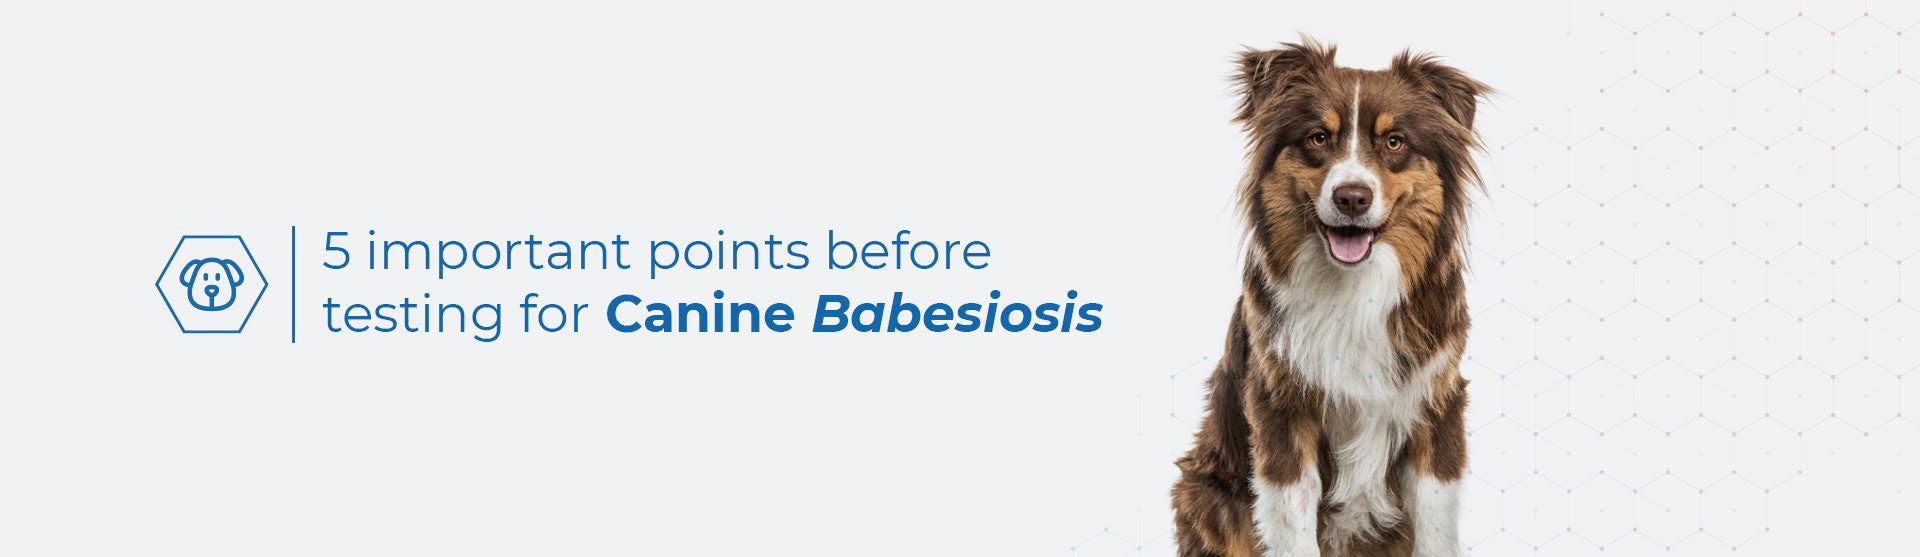 5 important points before testing for Canine Babesiosis